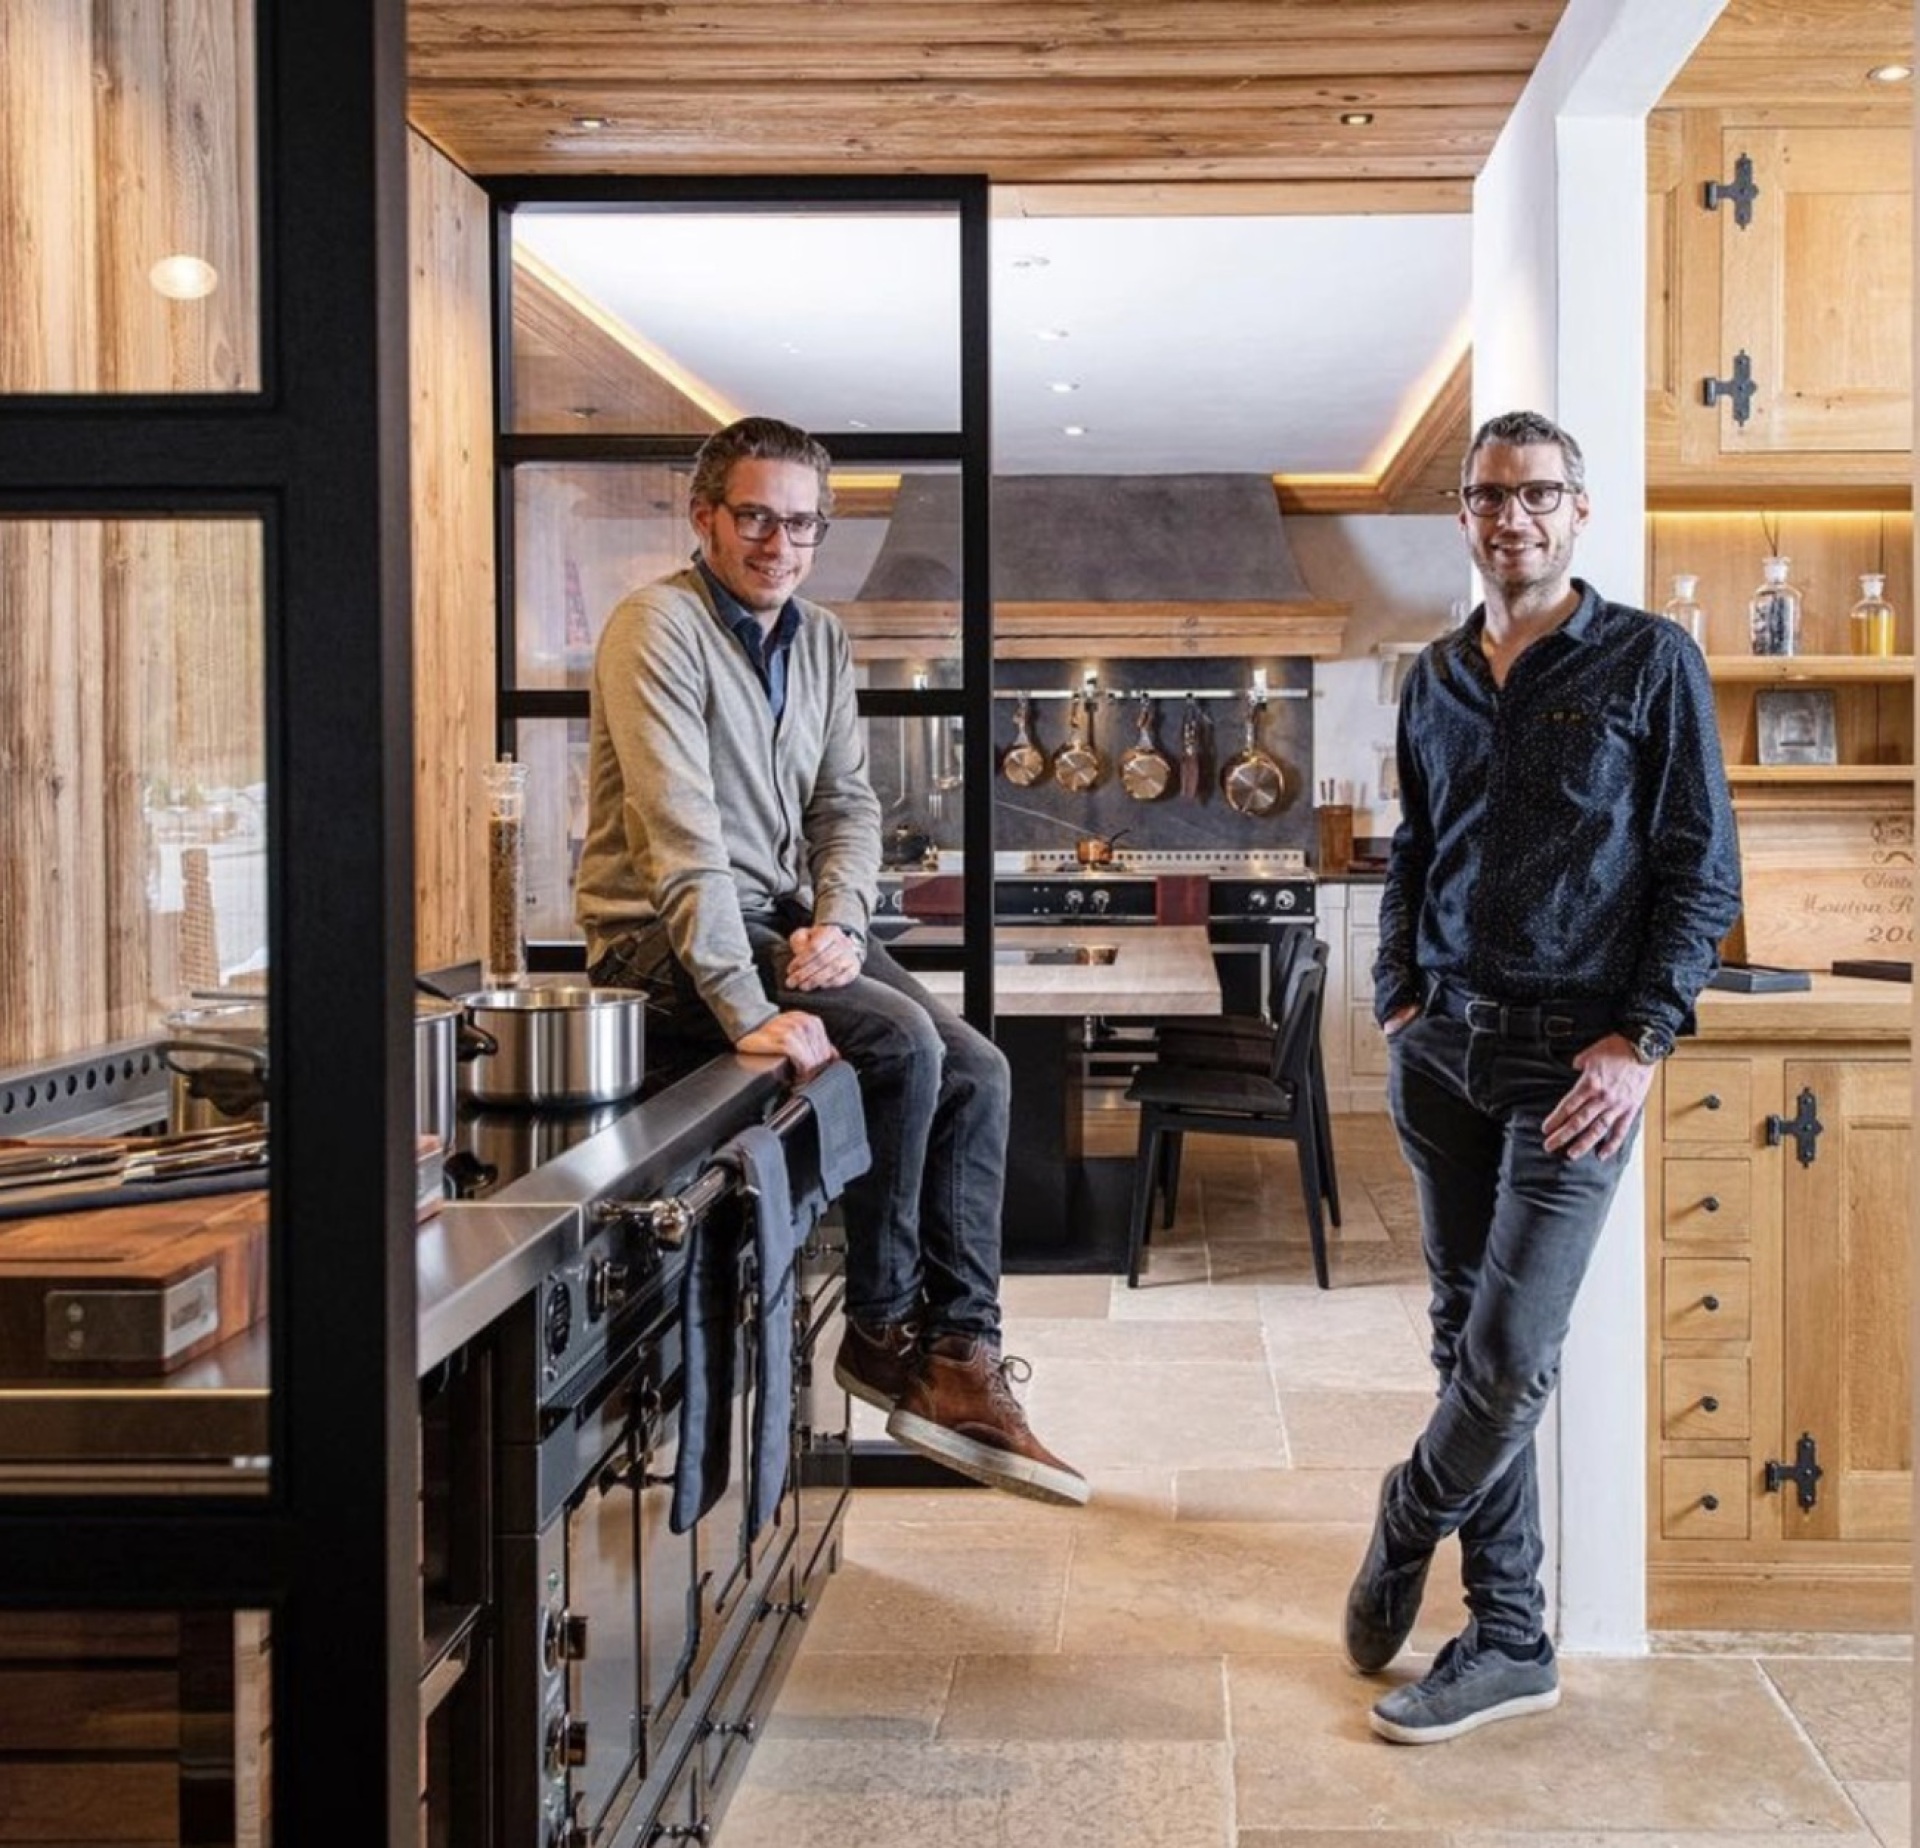 Brothers Benjamin and Matthias Zbären are 3rd. generation cabinetmakers and at the forefront of Zbären kitchen design